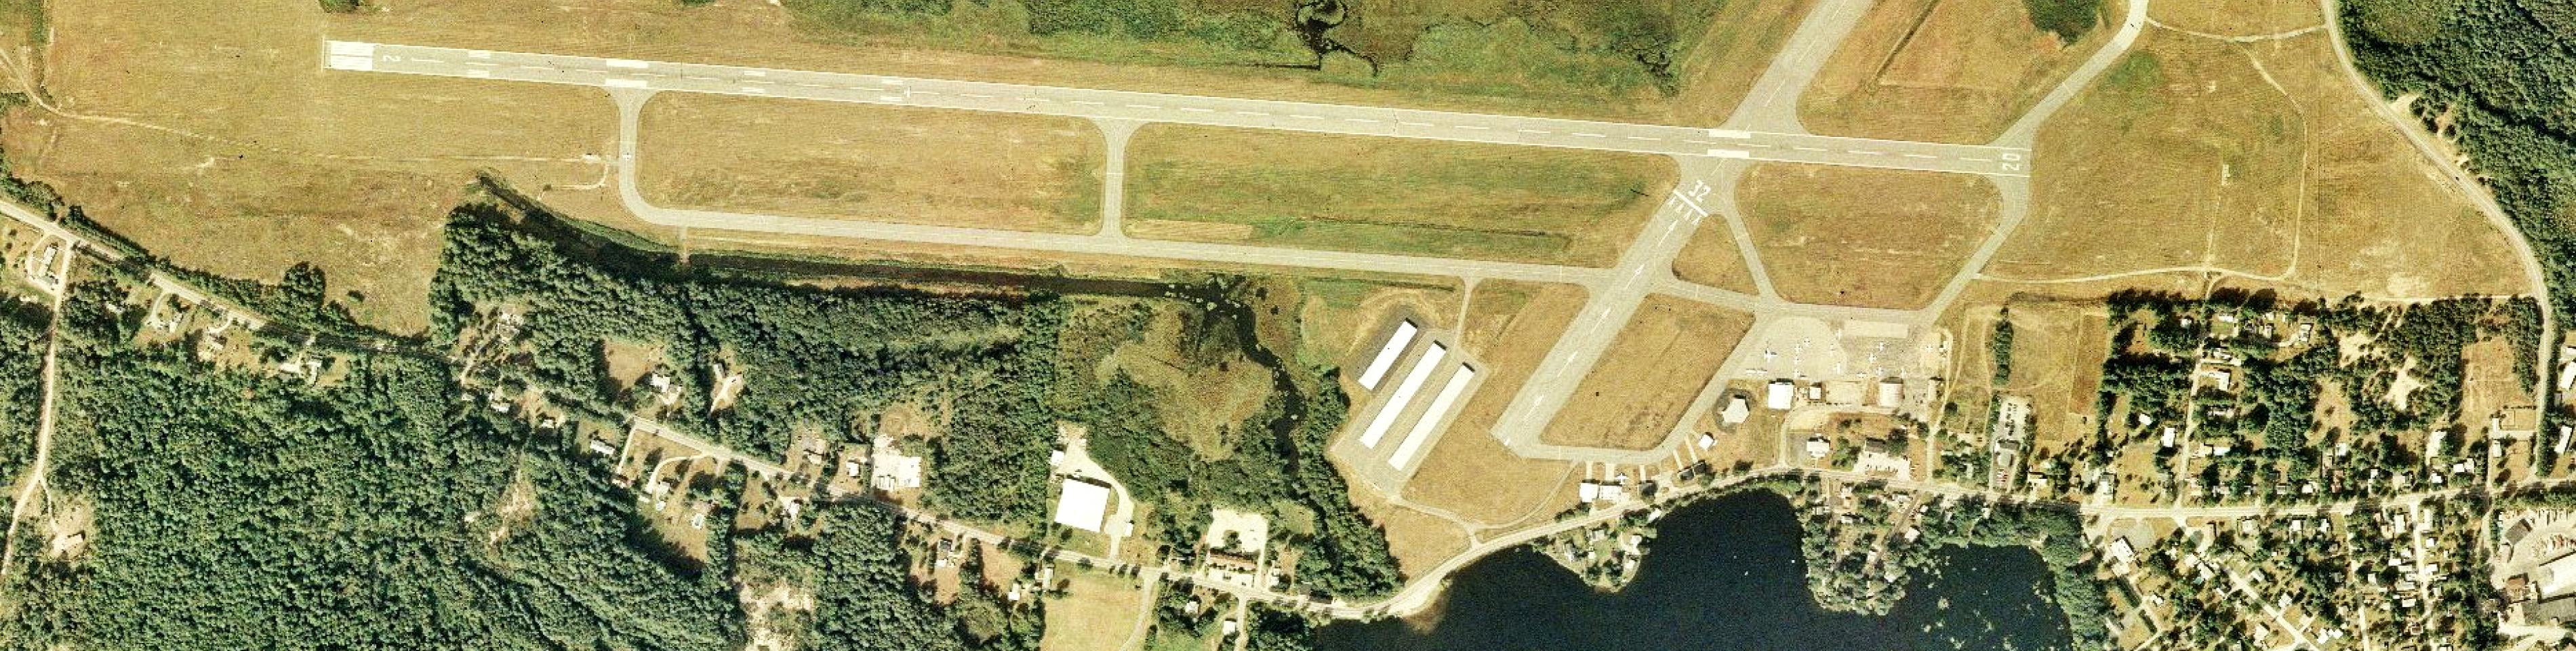 Airport Aerial View